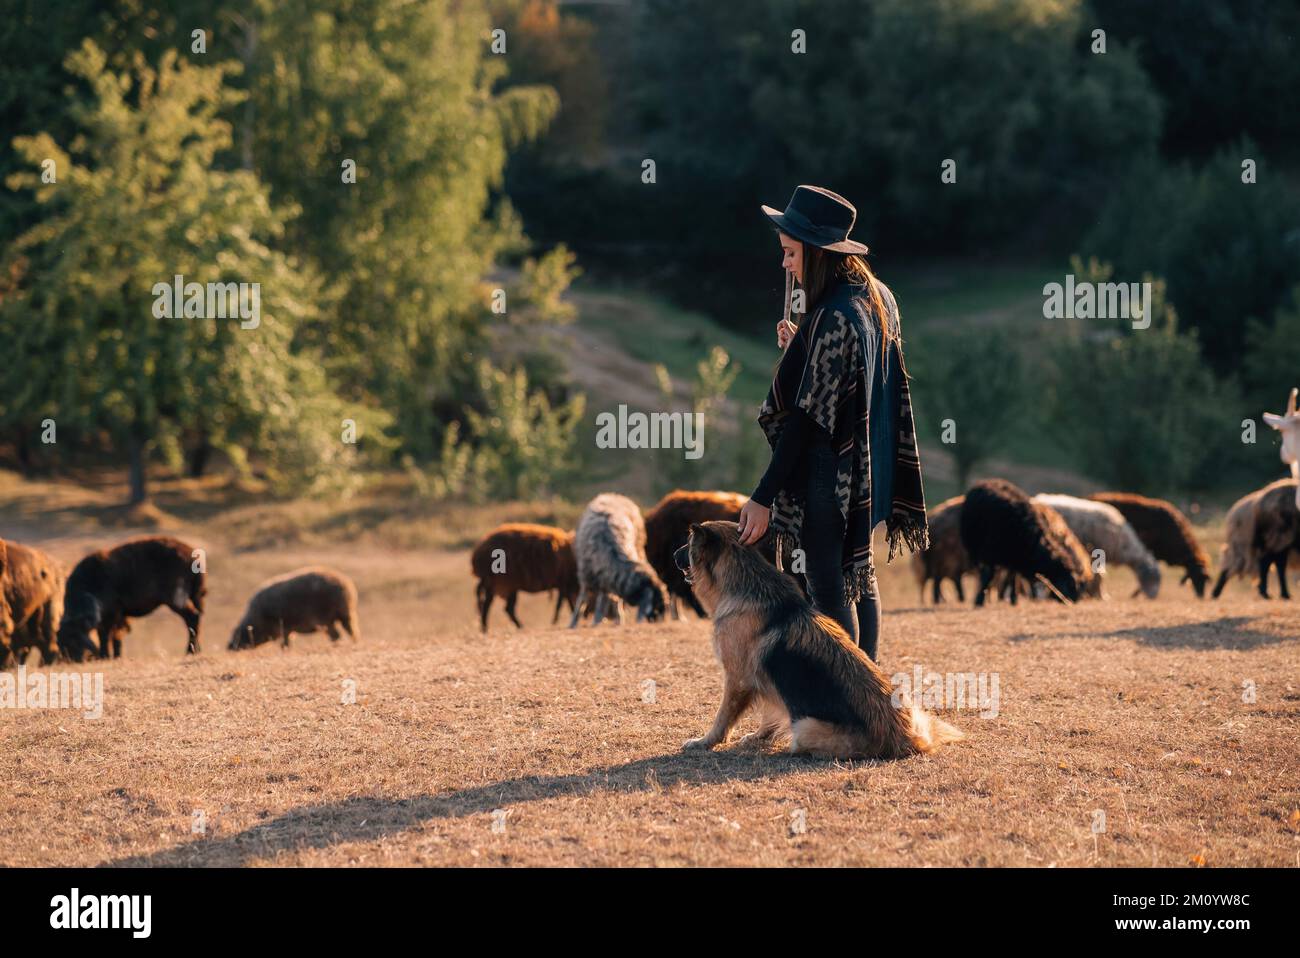 Female shepherd with a dog grazes a flock on the lawn Stock Photo